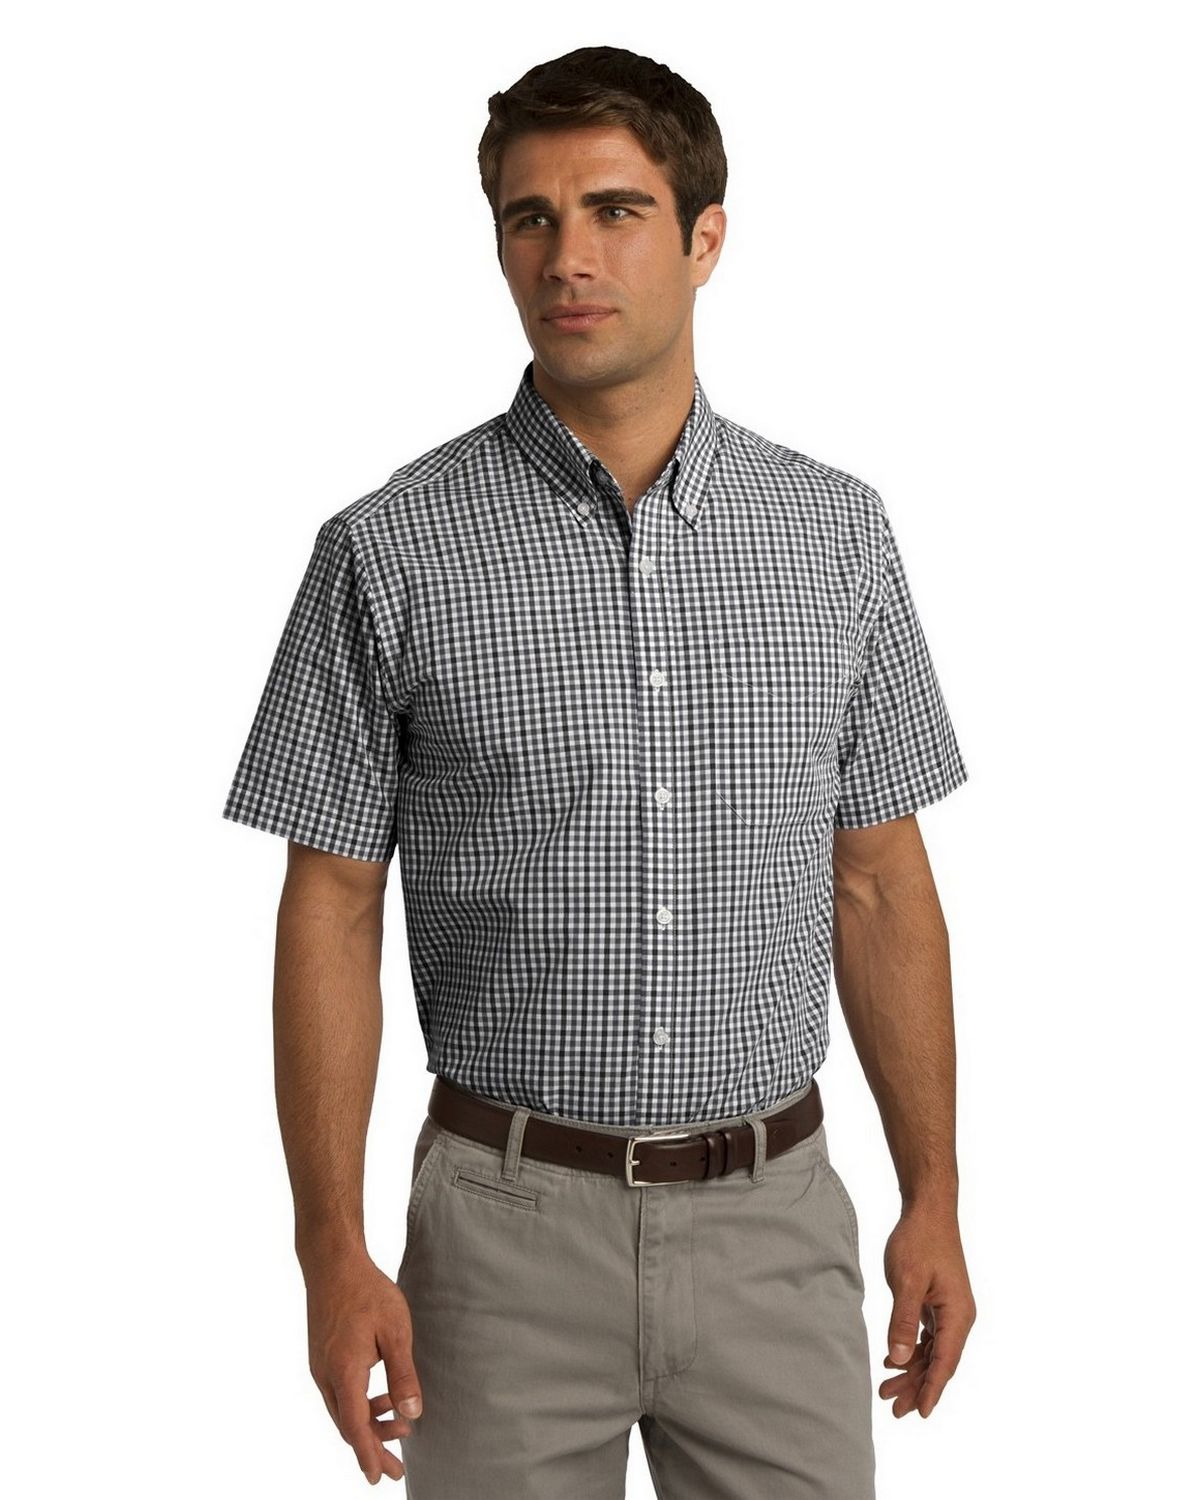 Size Chart for Port Authority S655 Short Sleeve Gingham Shirt